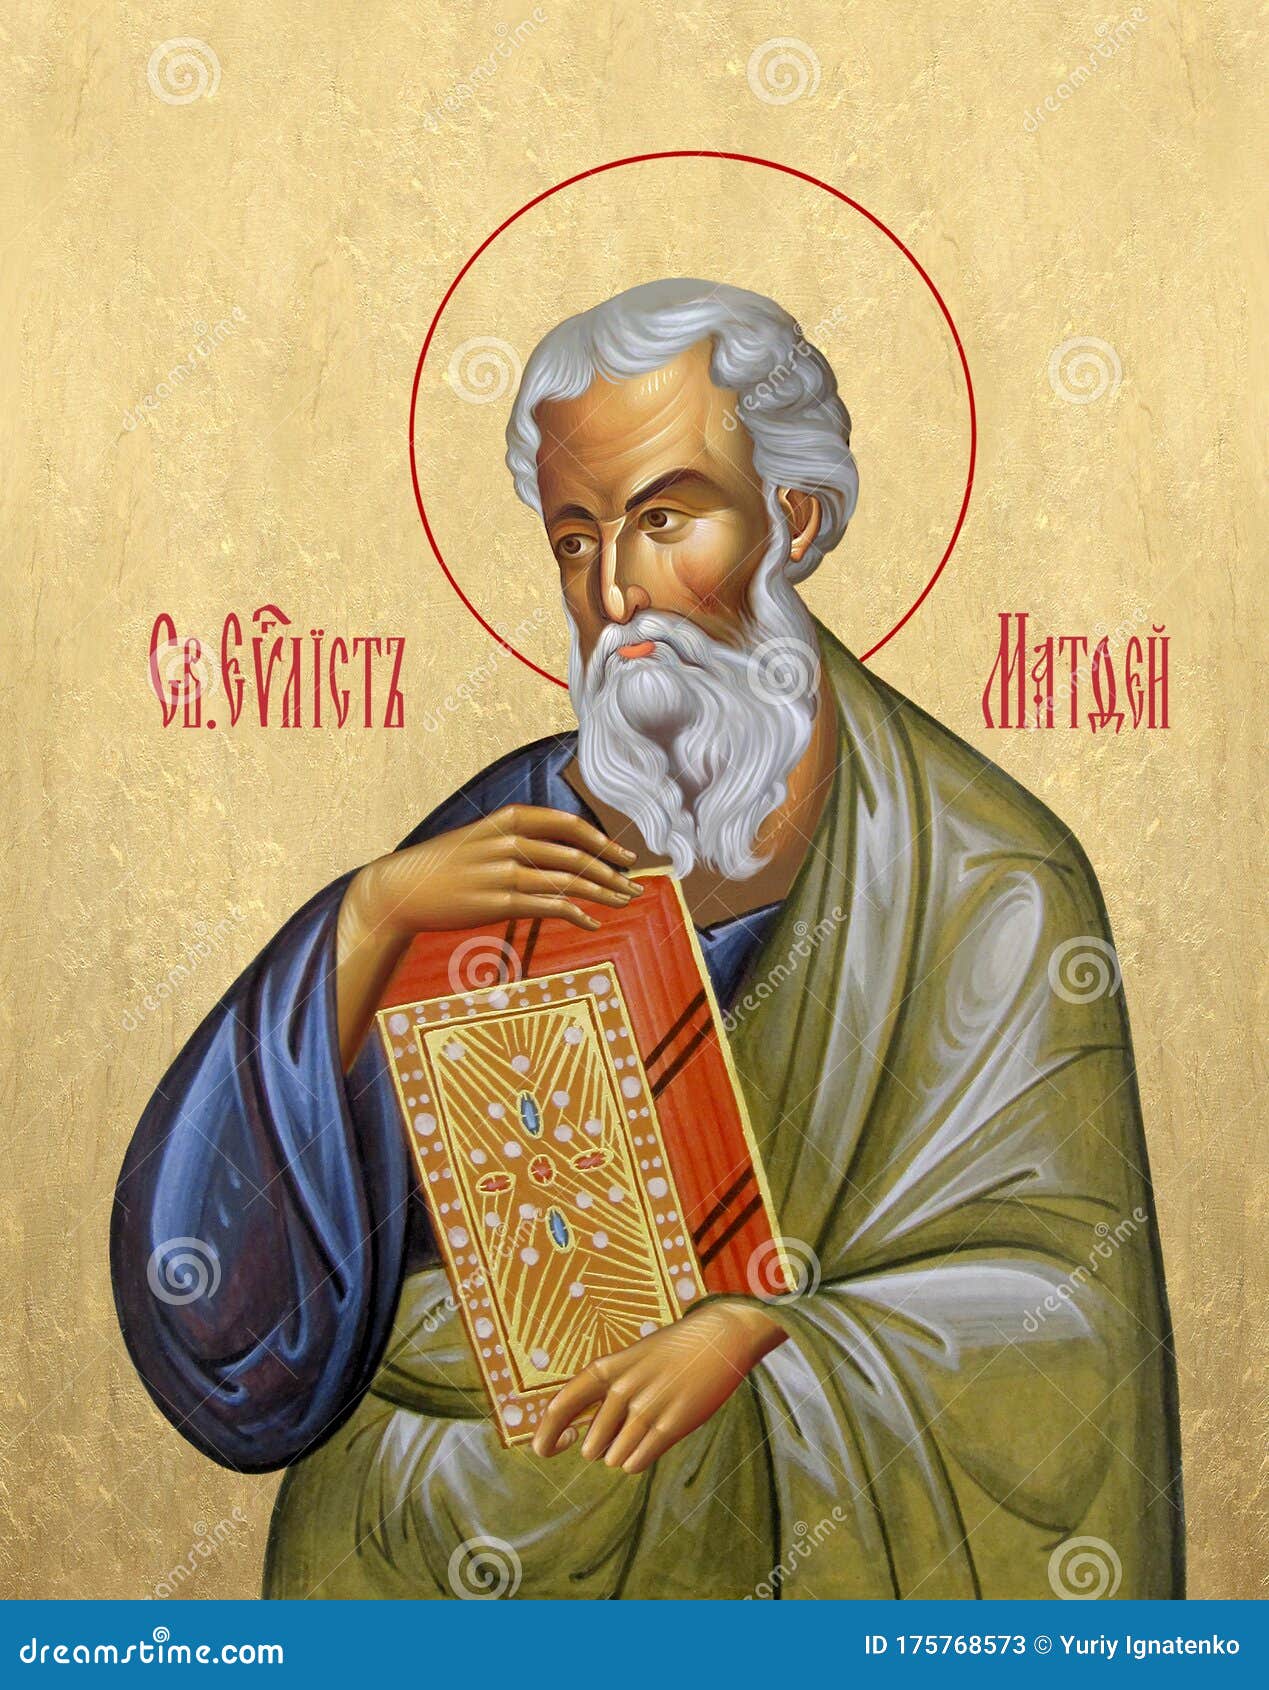 icon of the matthew the evangelist on a golden background